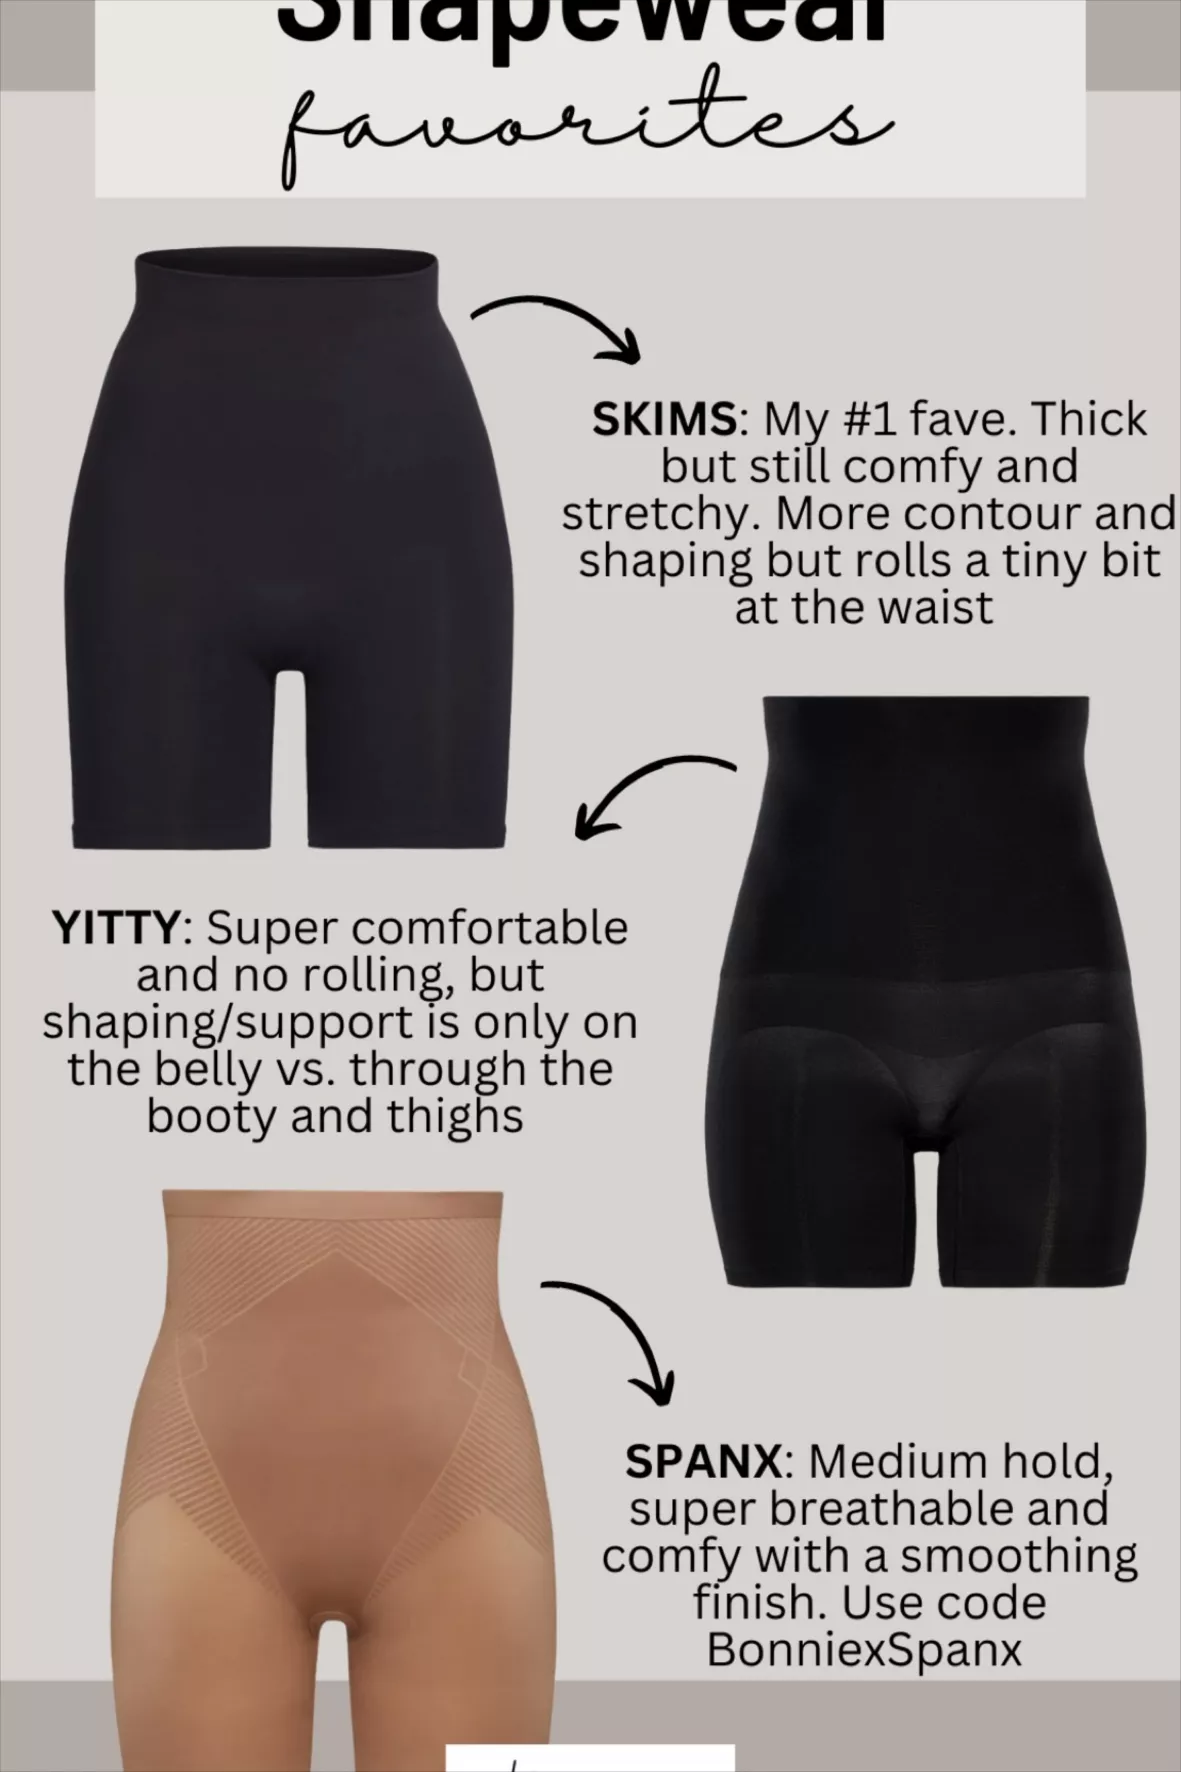 SPANX vs. SKIMS vs. Underoutfit – Which Shapewear Smooths Out My Curves?